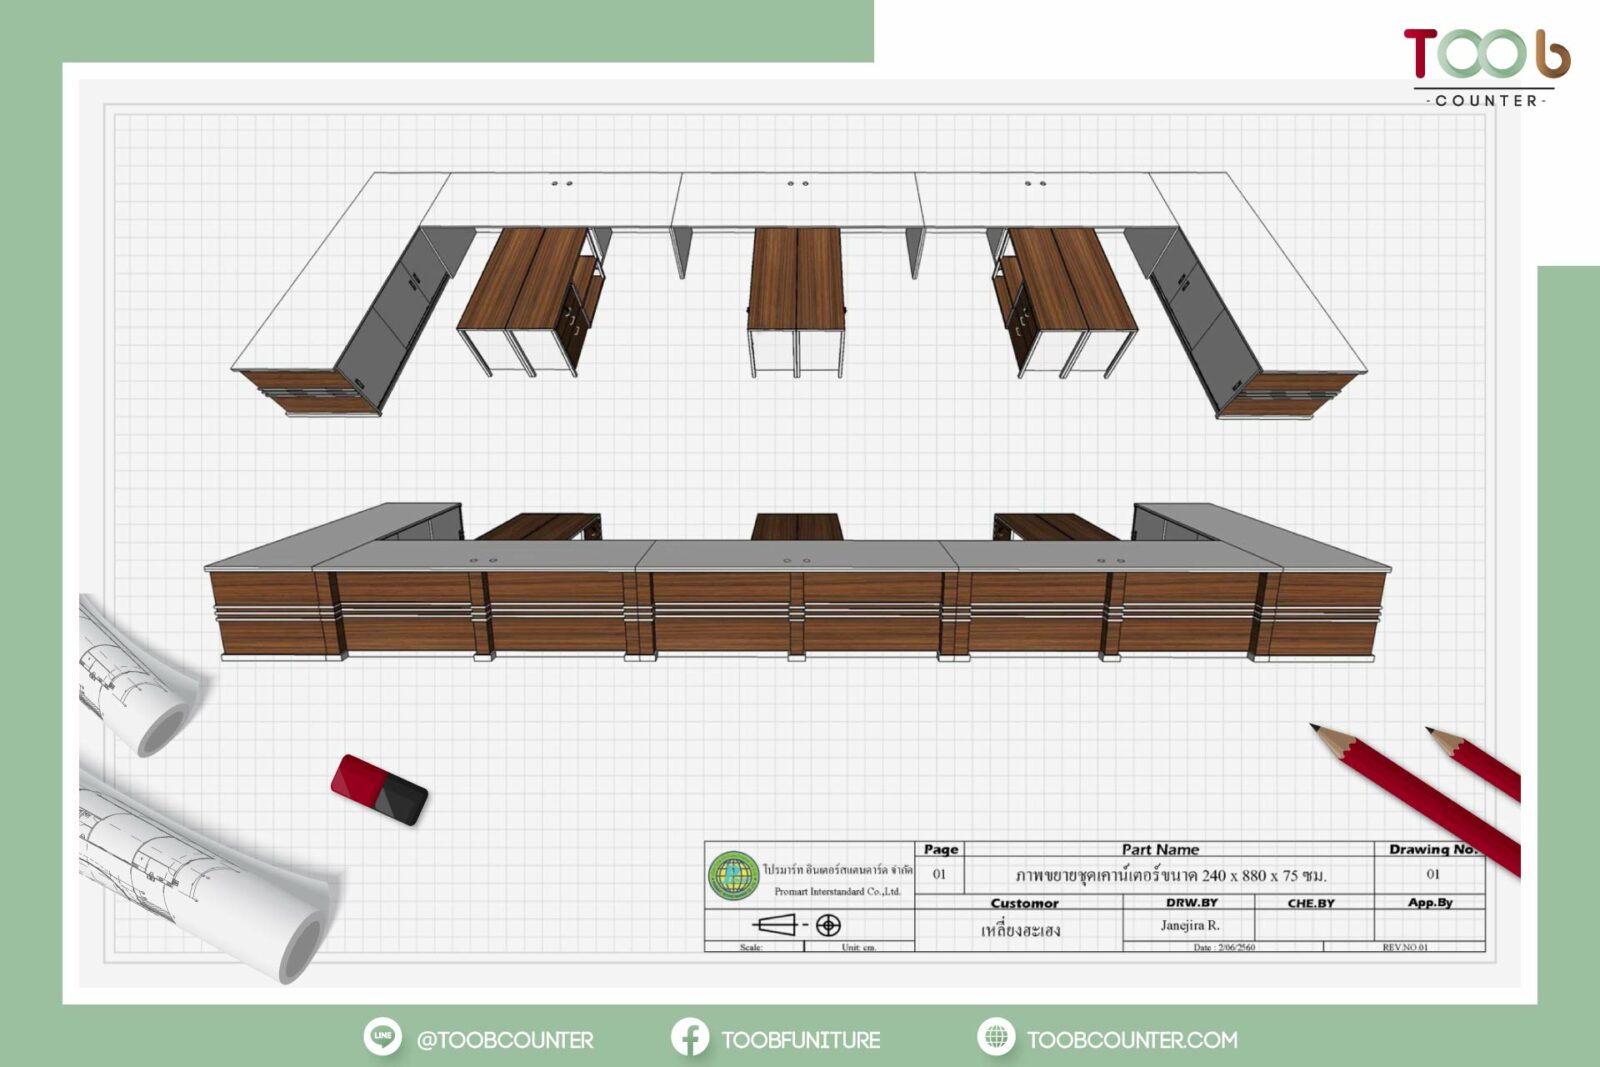 Drawing perspective view design 3 seat reception counter